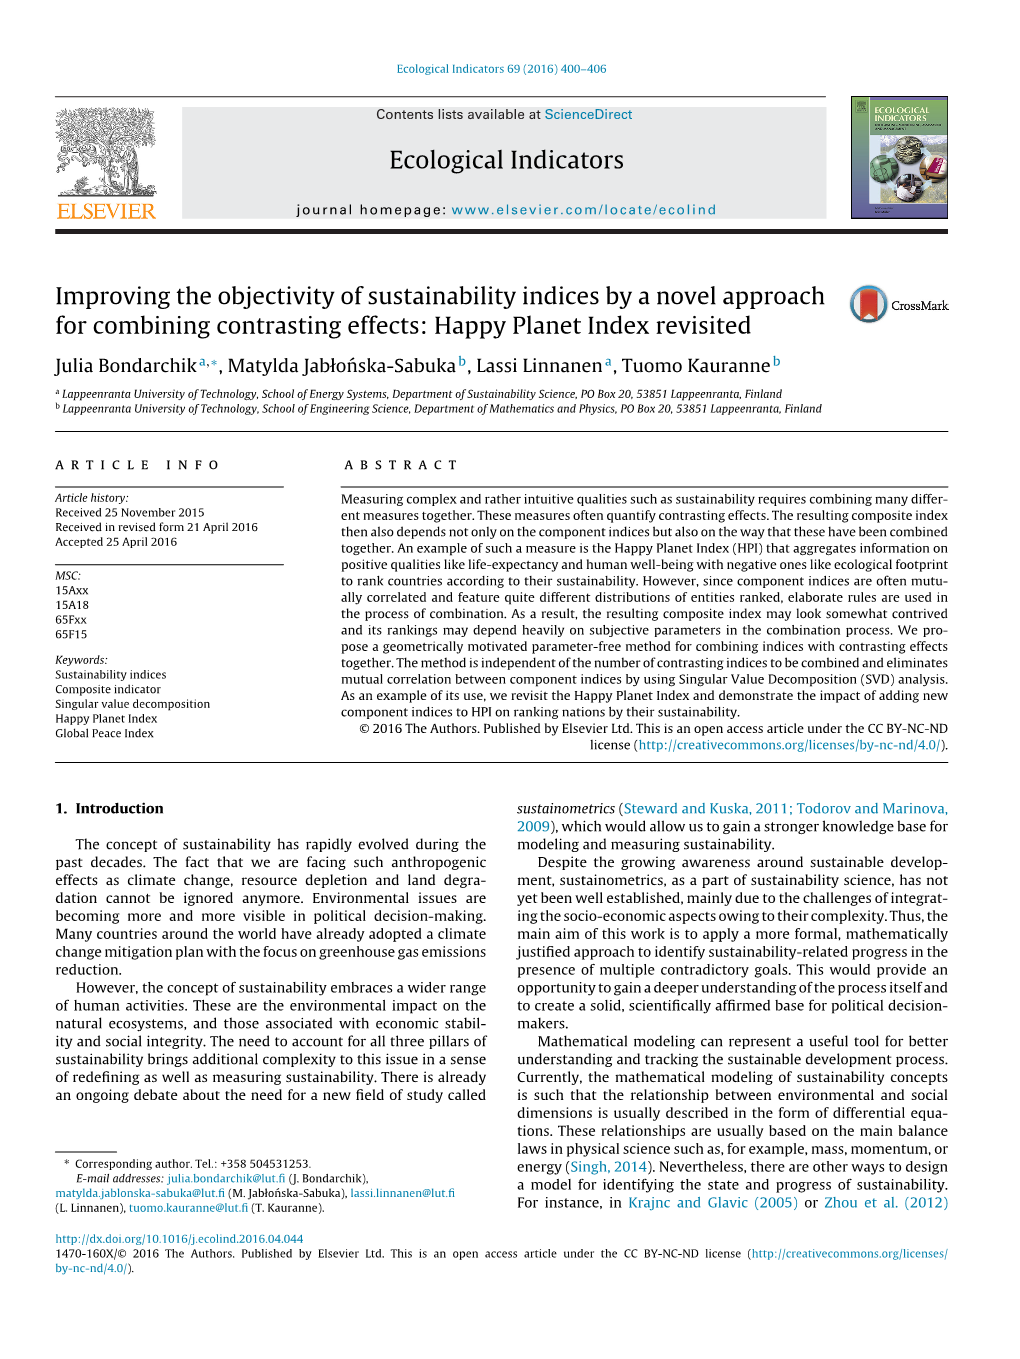 Improving the Objectivity of Sustainability Indices by a Novel Approach